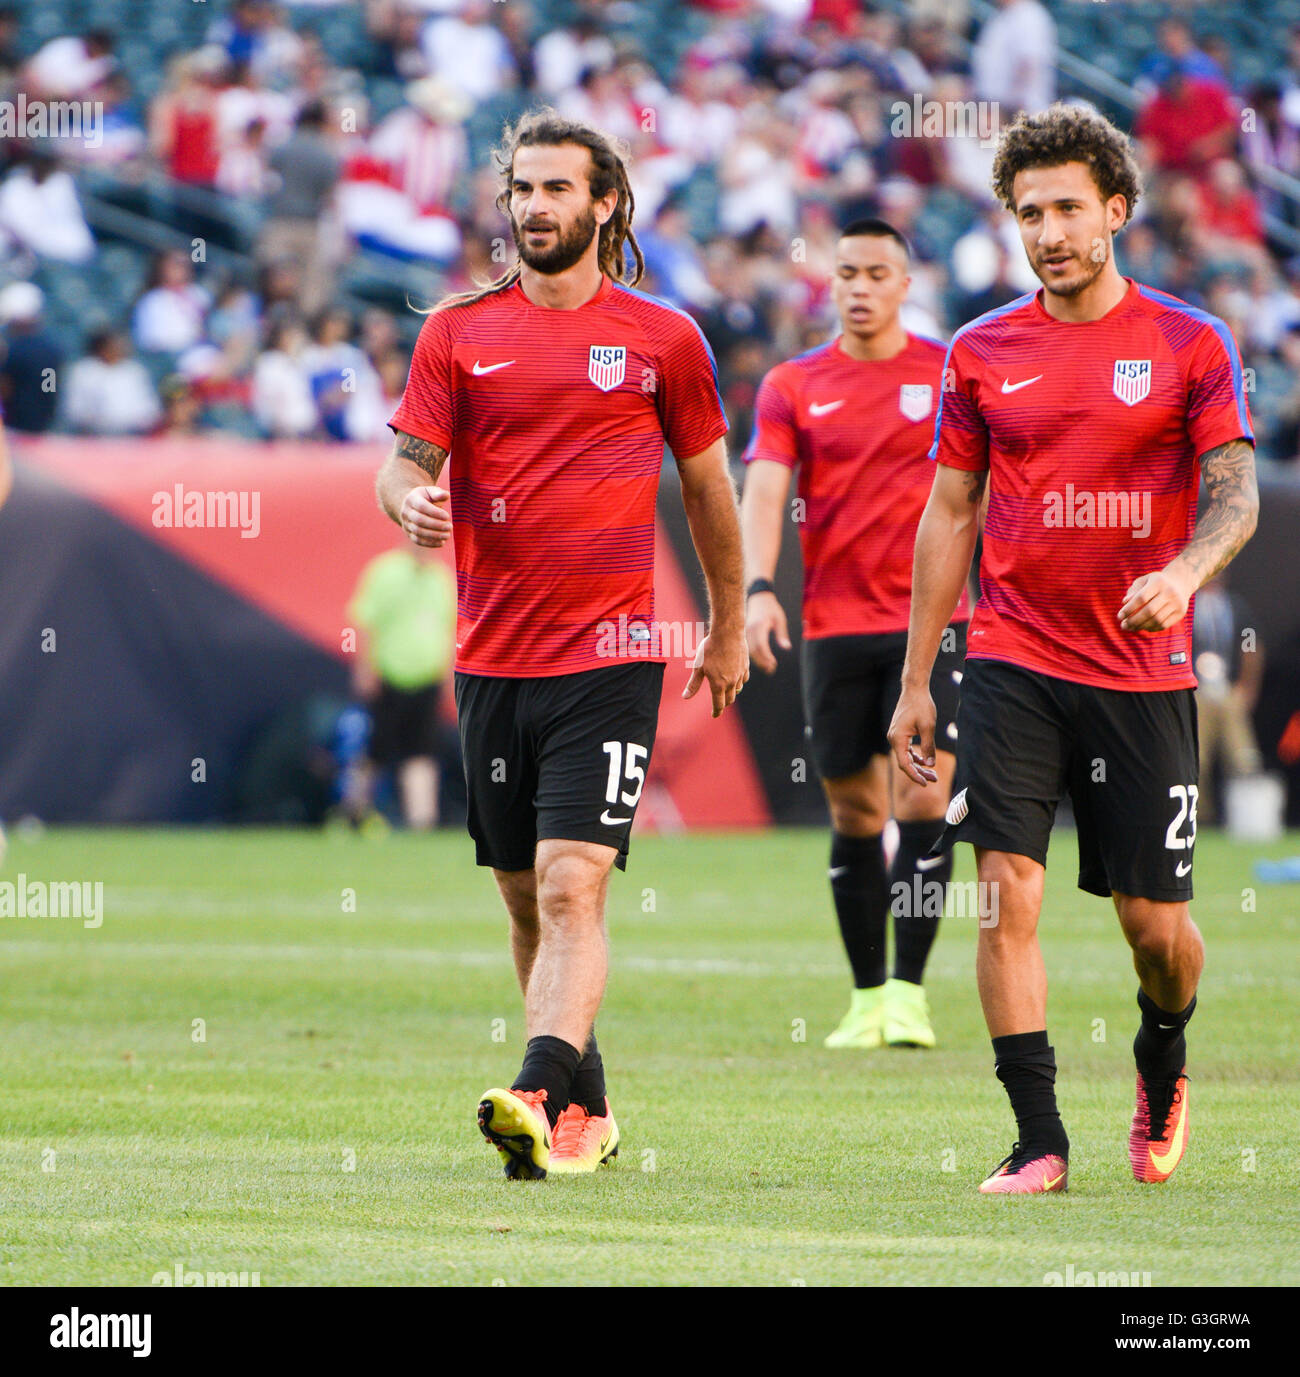 Philadelphia, Pennsylvania, USA. 11th June, 2016. KYLE BECKMAN and FABIAN JOHNSON walk off of the pitch after warming up of the USA during the Copa America match played at Lincoln Financial Field in Philadelphia Pa © Ricky Fitchett/ZUMA Wire/Alamy Live News Stock Photo